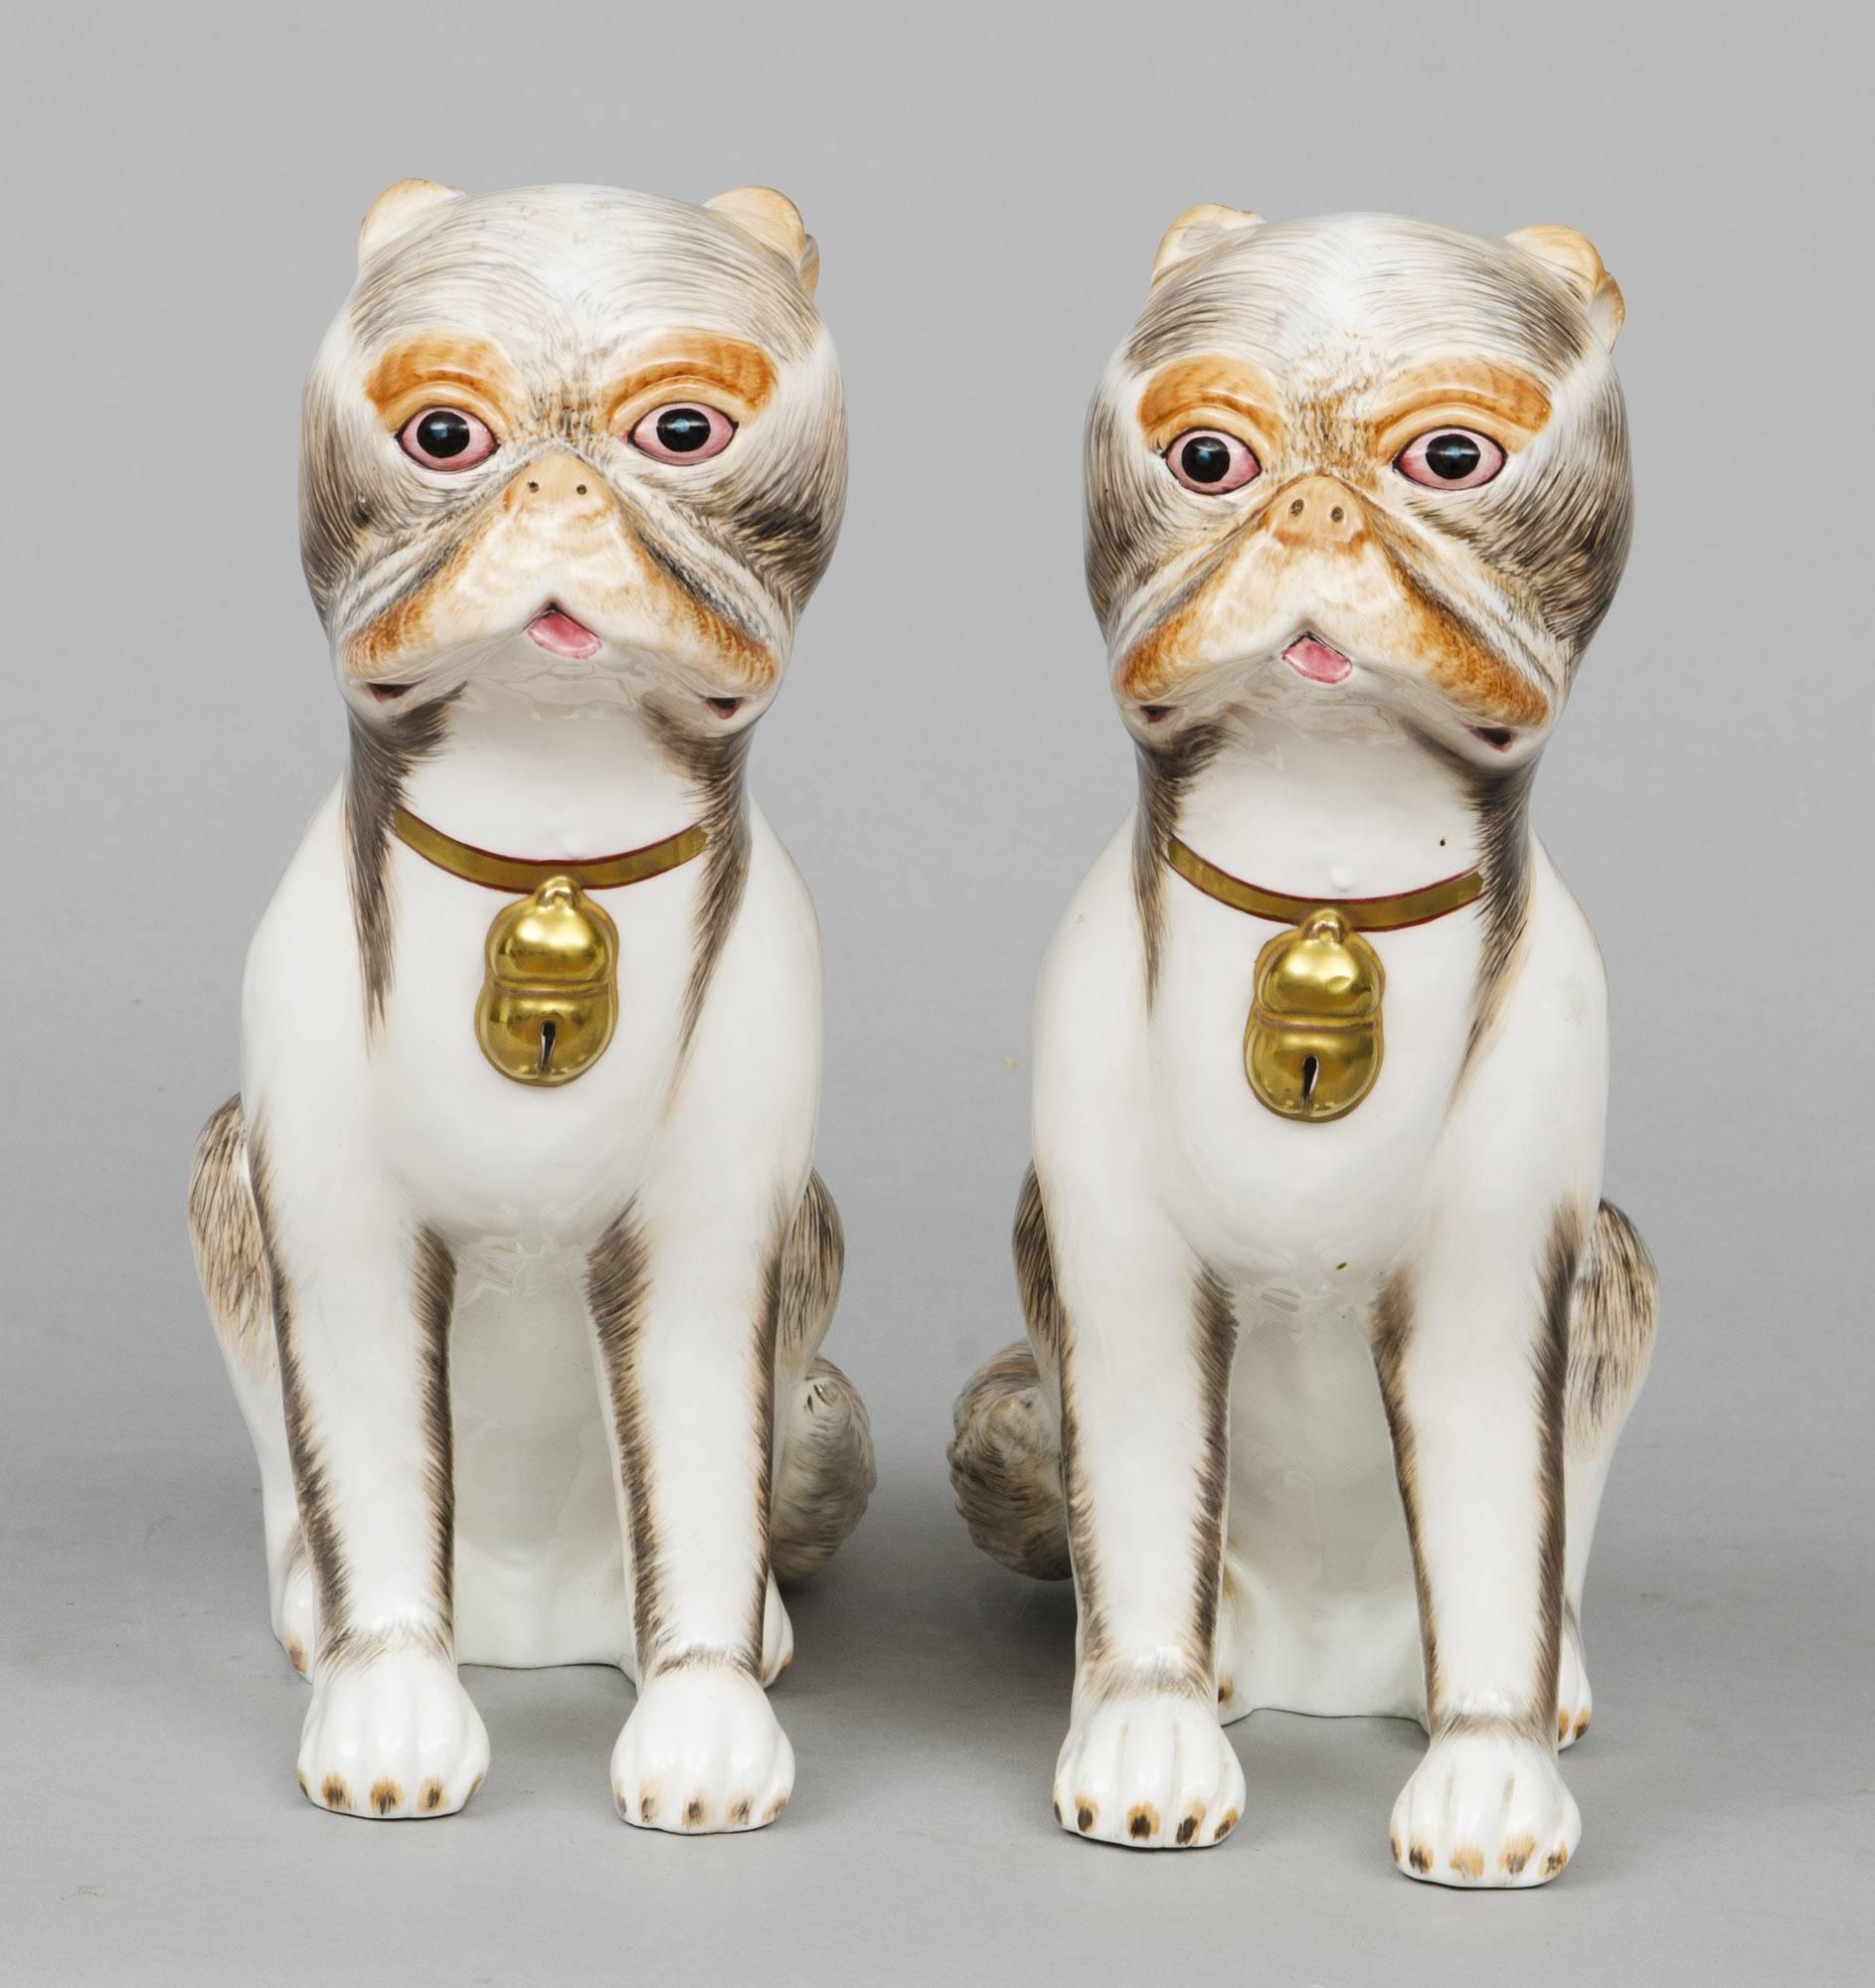 Pair of continental porcelain pug dogs sitting on their haunches, having separated legs and wearing gilded collars and bells.

   